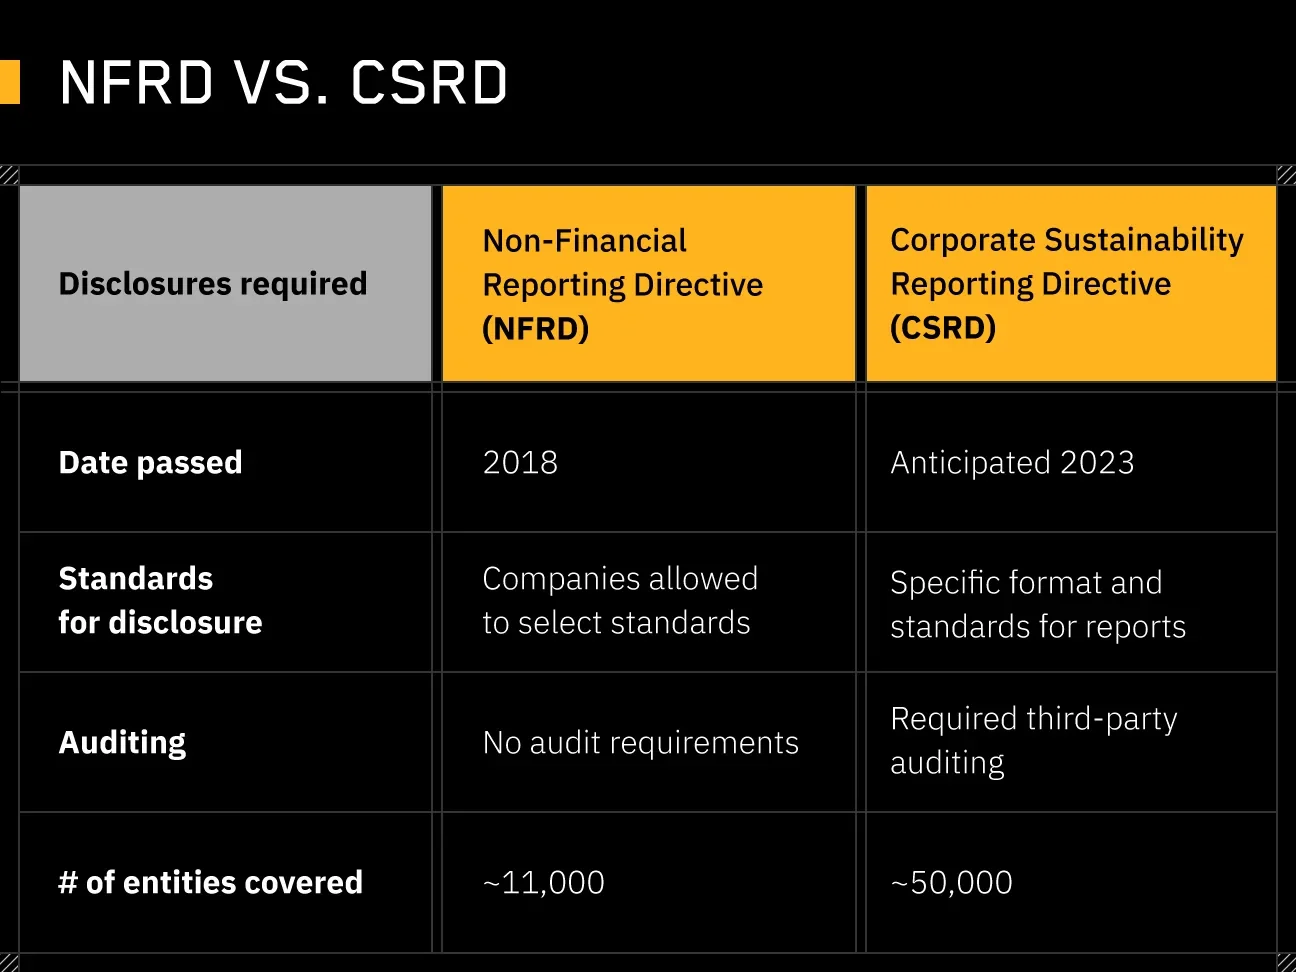 table comparing characteristics of the European Union’s Non-Financial Reporting Directive (NFRD) and the Corporate Sustainability Reporting Directive (CSRD)